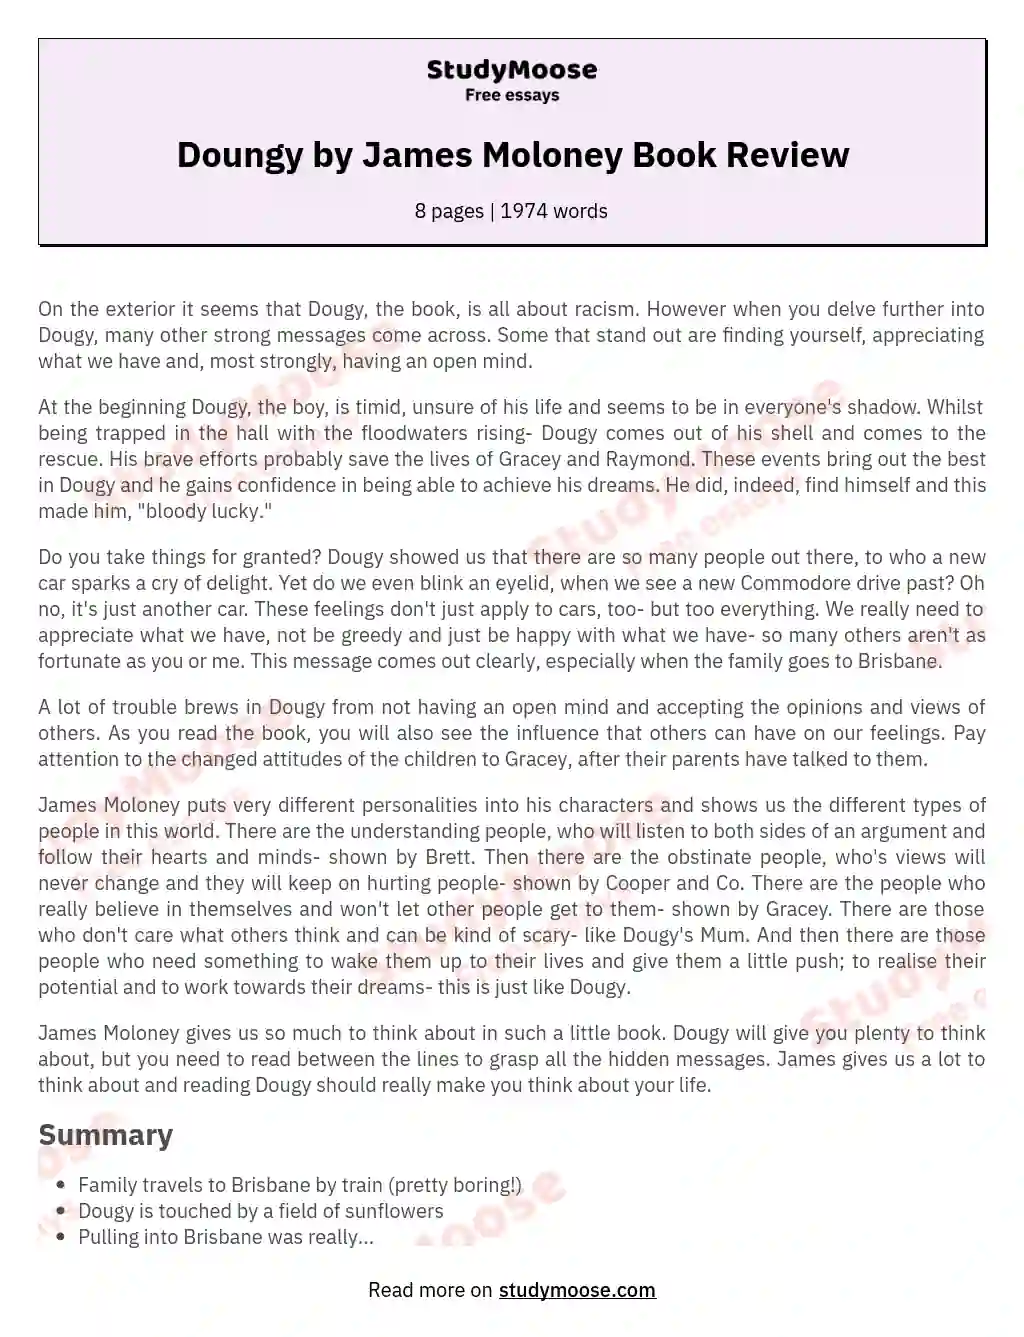 Doungy by James Moloney Book Review essay